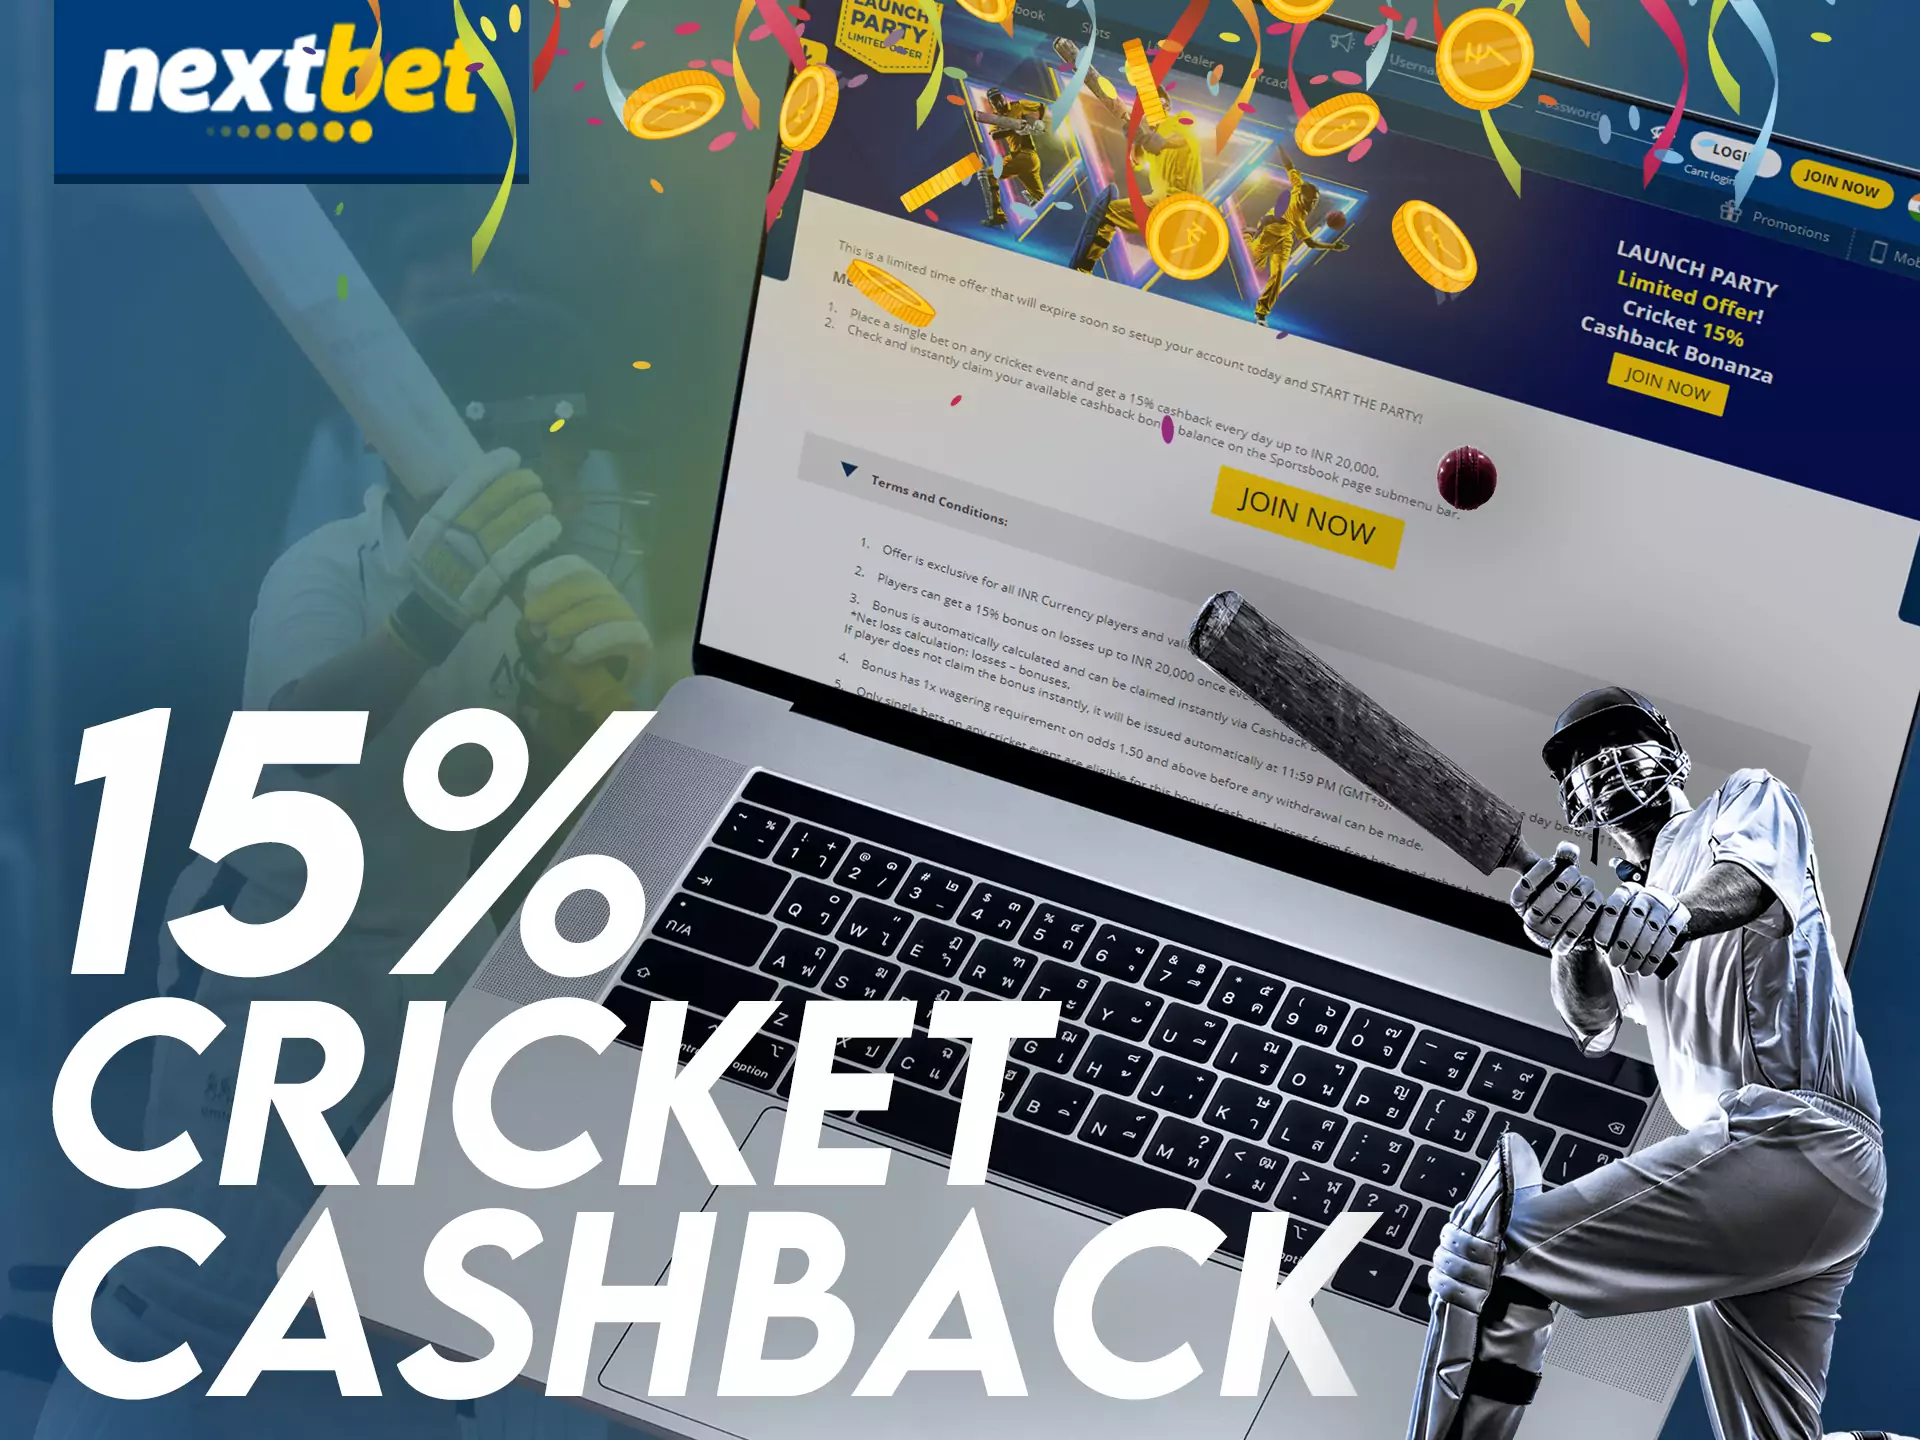 In Nextbet, get a special cashback for betting on cricket.